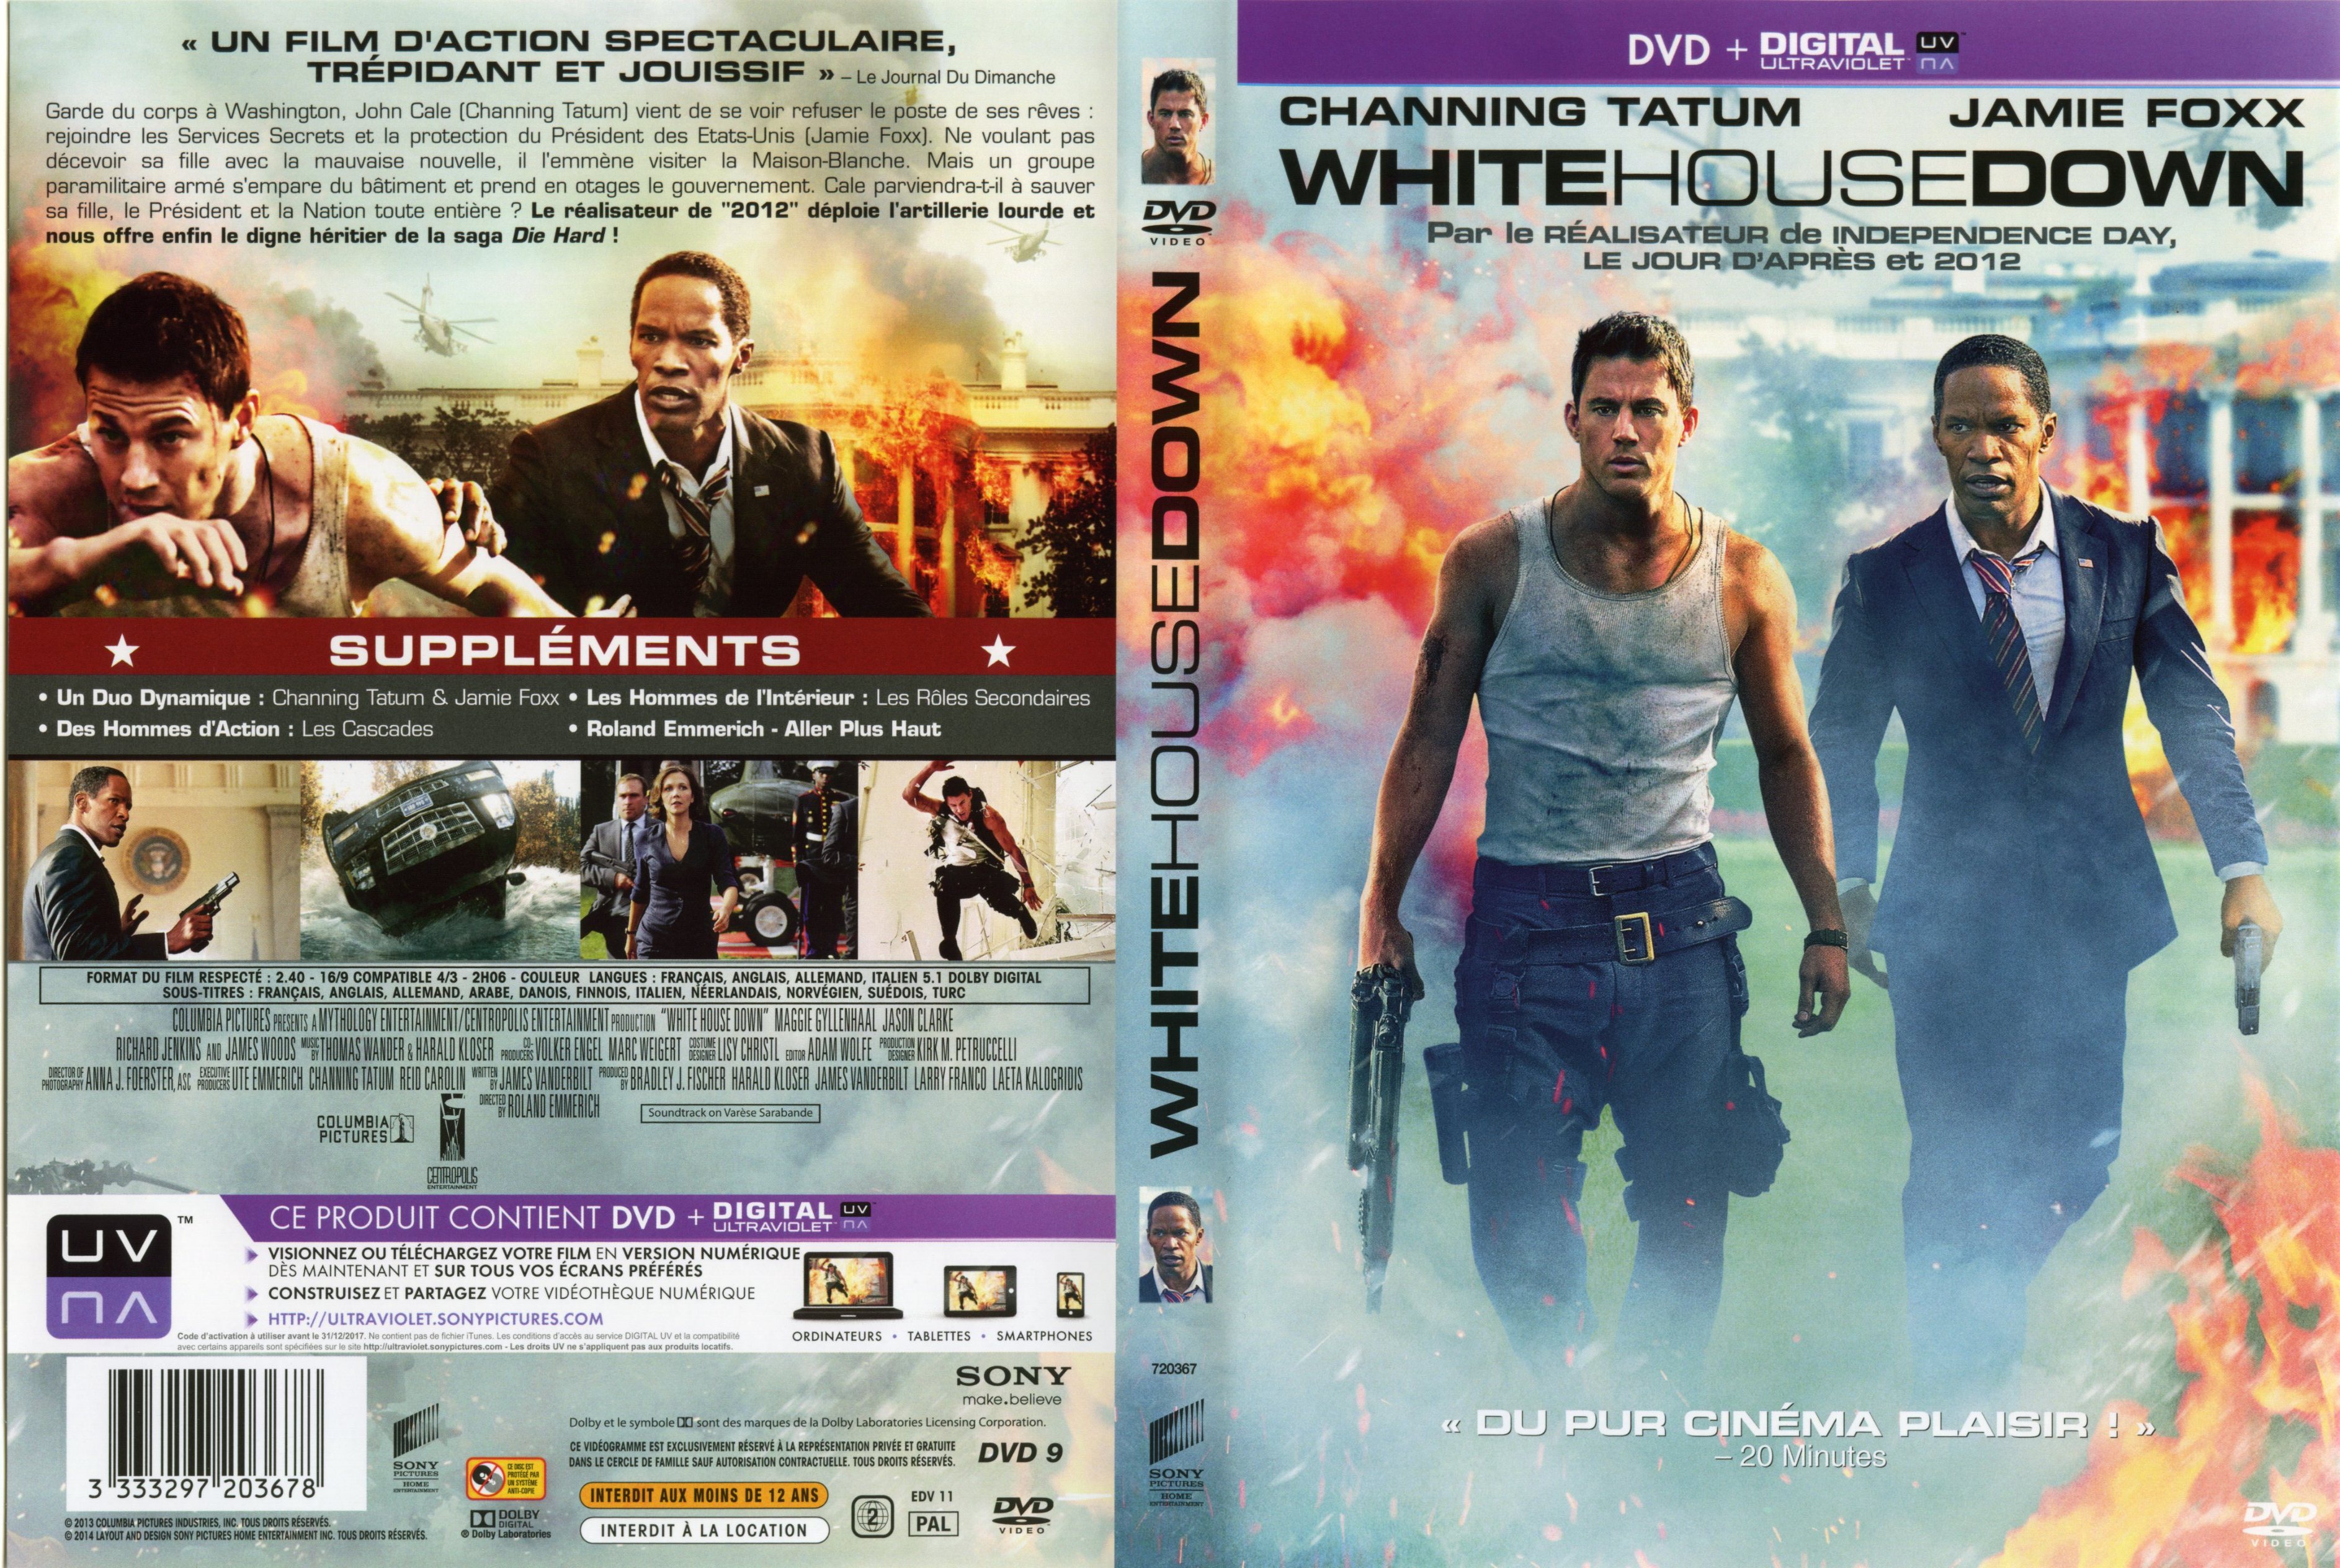 Jaquette DVD White House Down